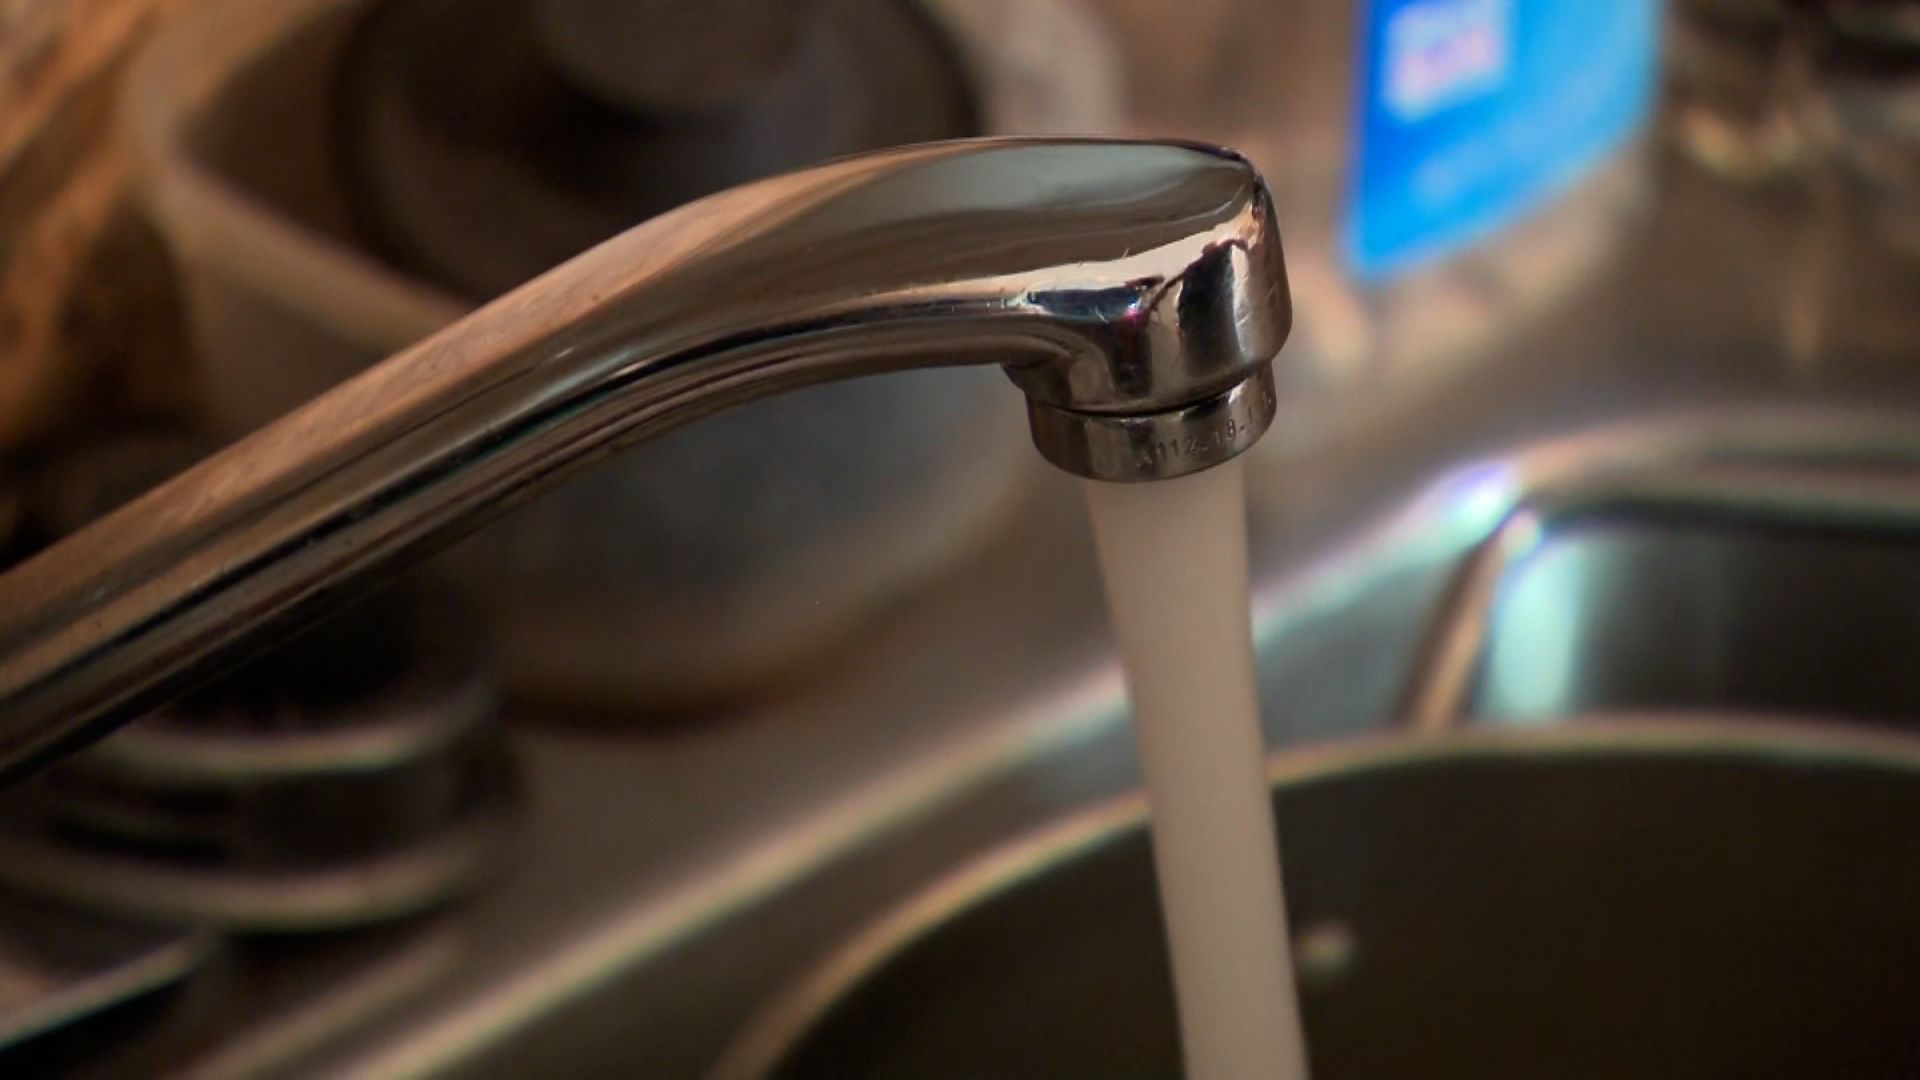 Water Woes Continue: E. Coli Traces Trigger Boil Water Advisory in Jackson, Mississippi